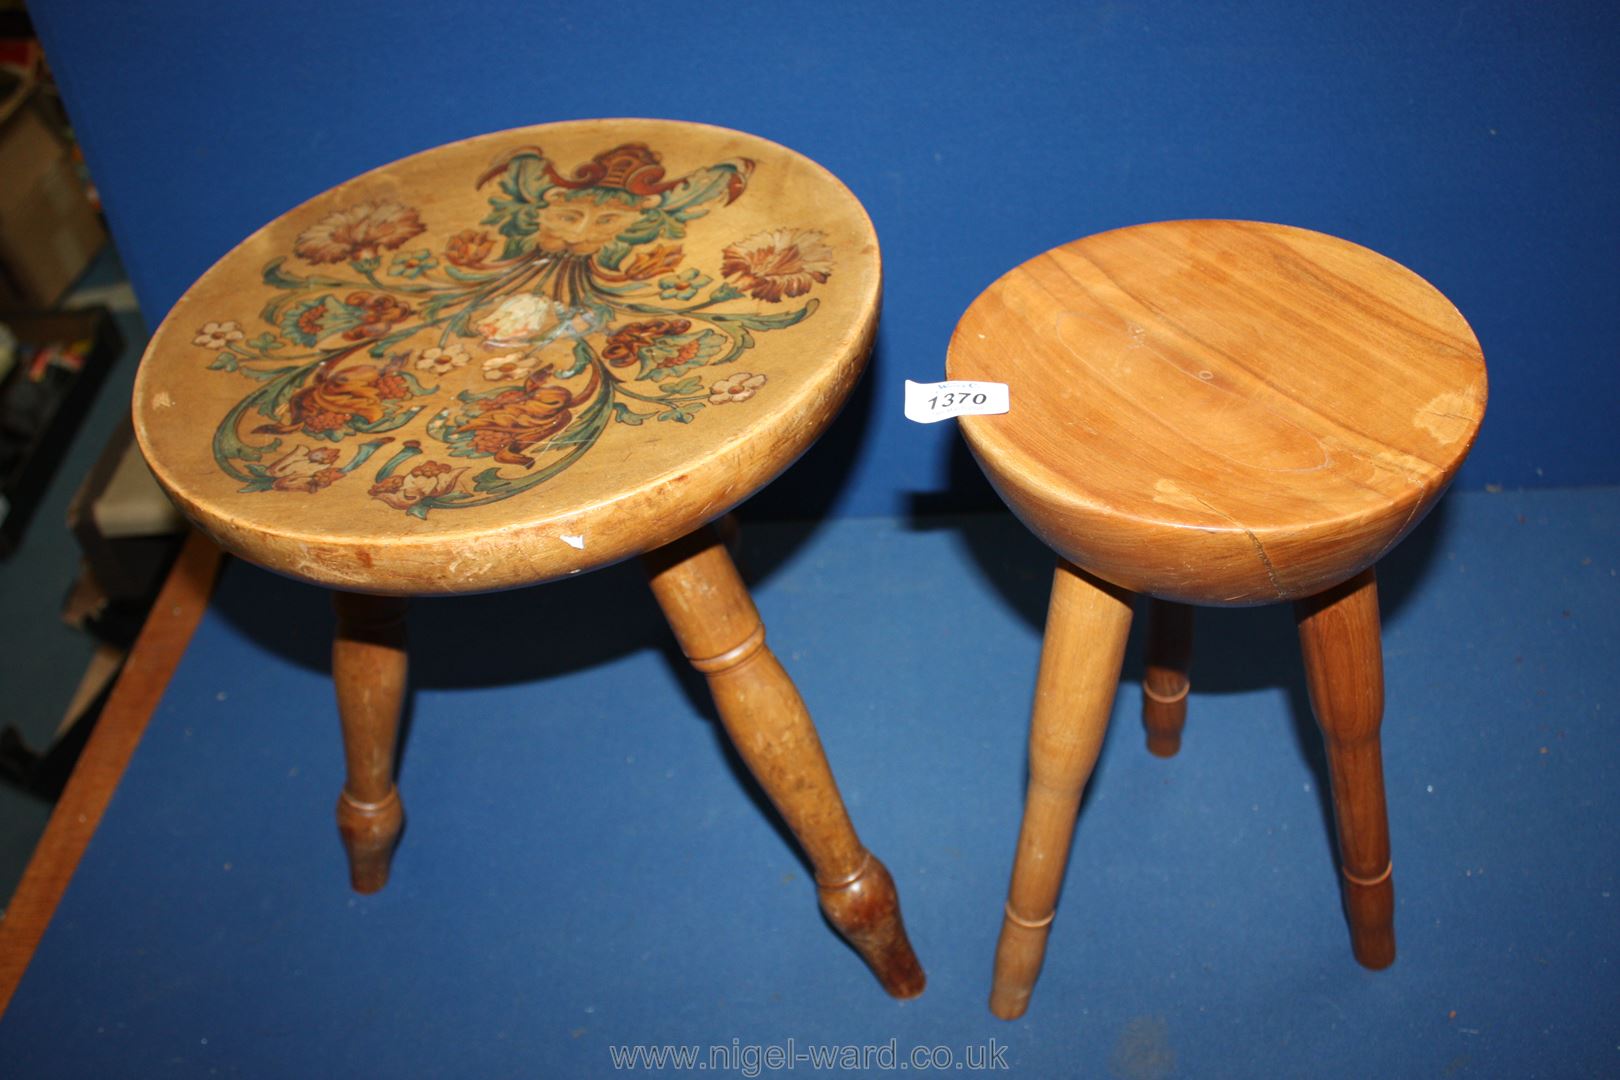 Two milking stools, one decorated with flowers.